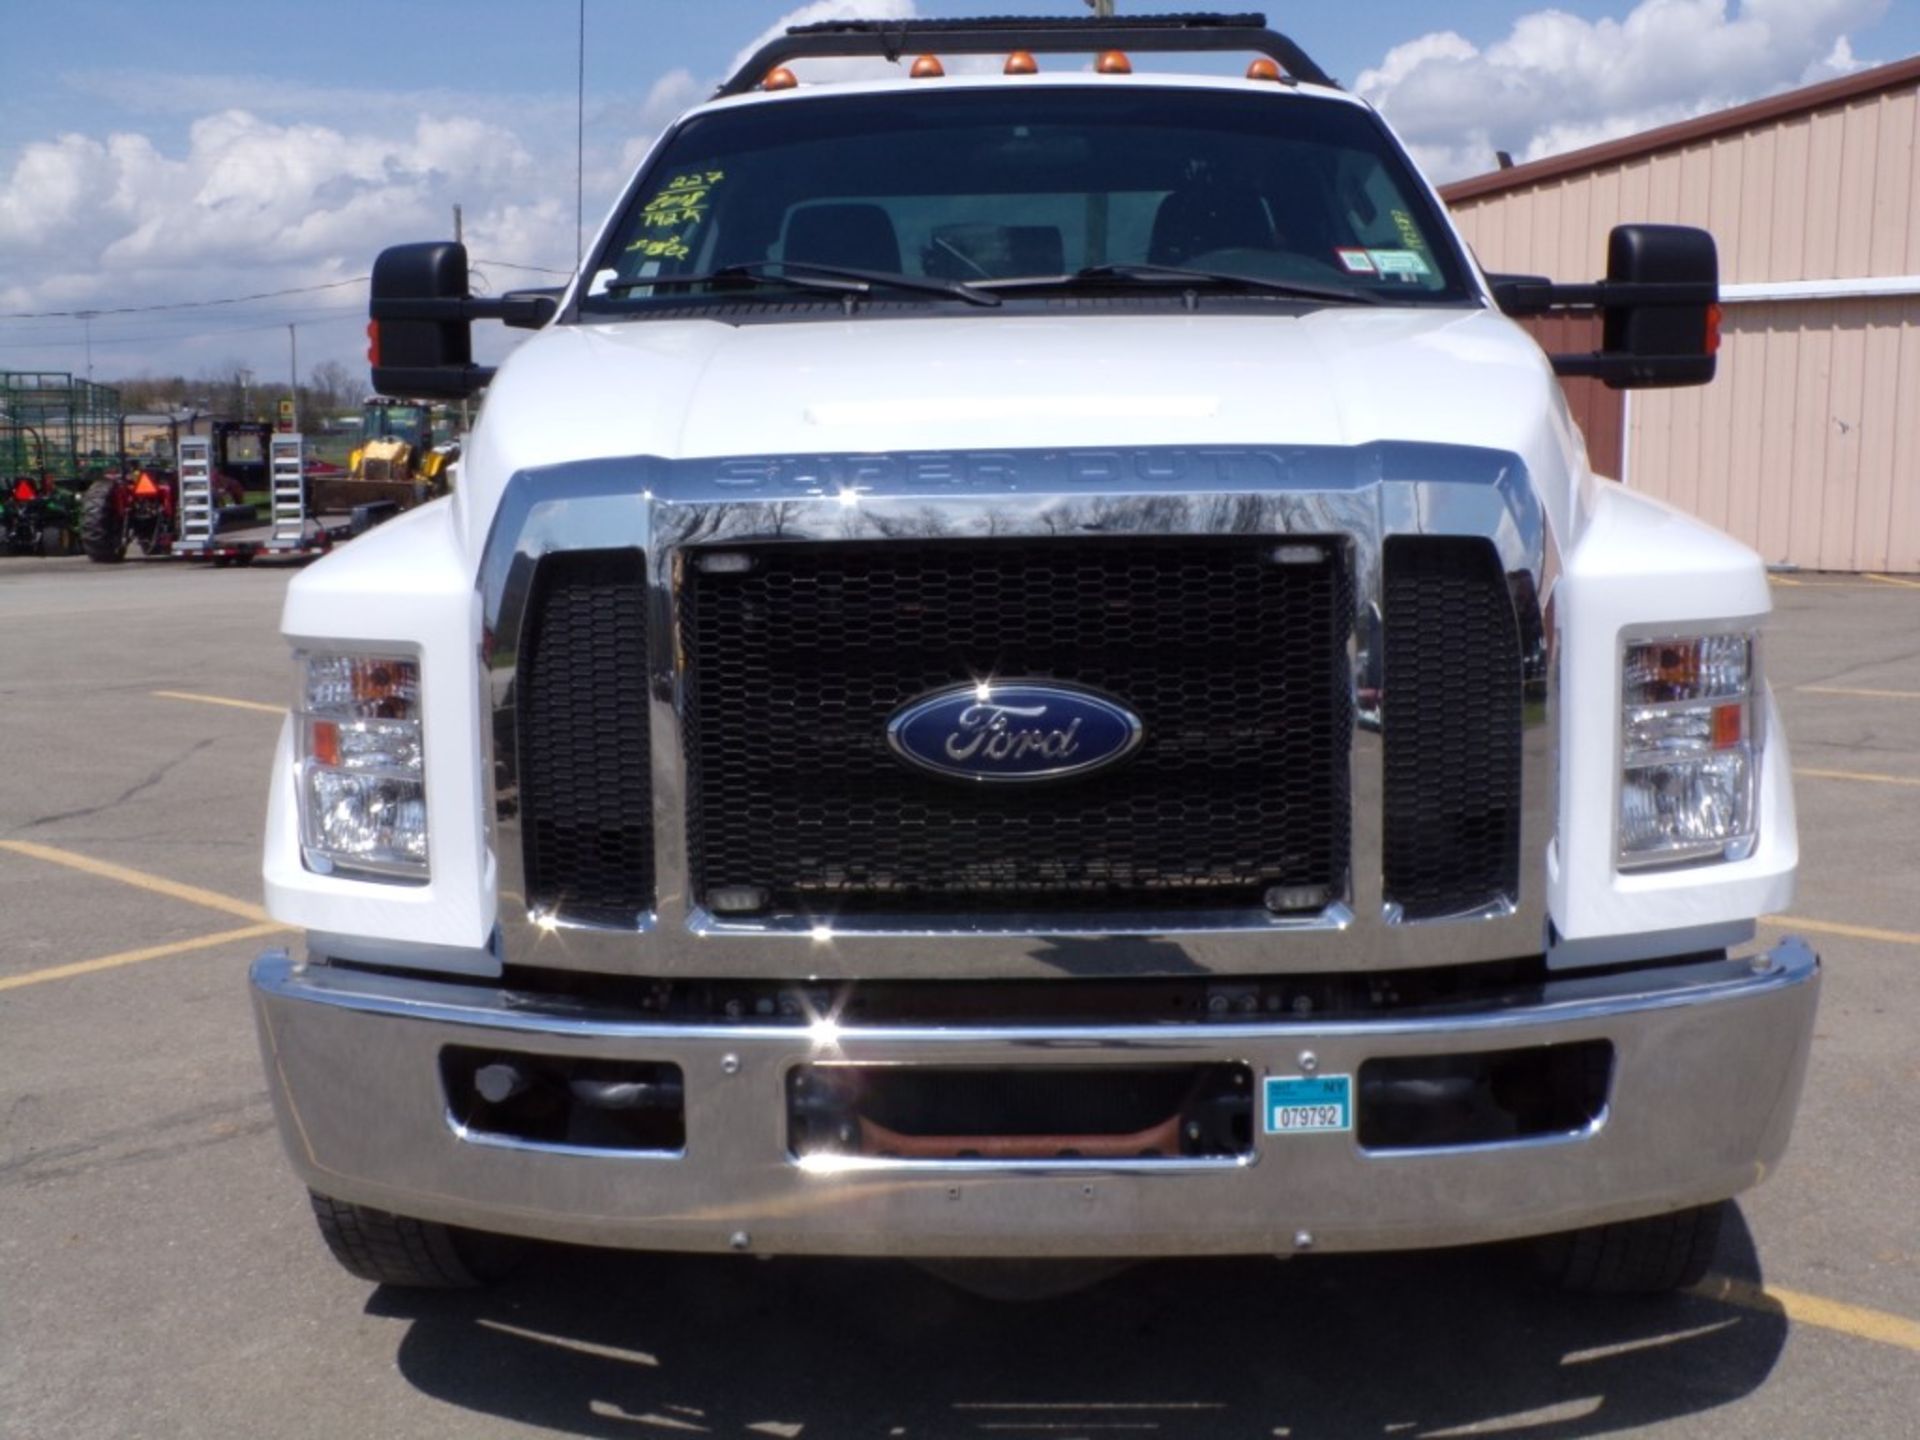 2018 Ford F650 Ext. Cab, Rollback Truck, 6.7 Dsl. Engine, Auto Trans, Air Brakes, 25,900 GVWR, - Image 3 of 13